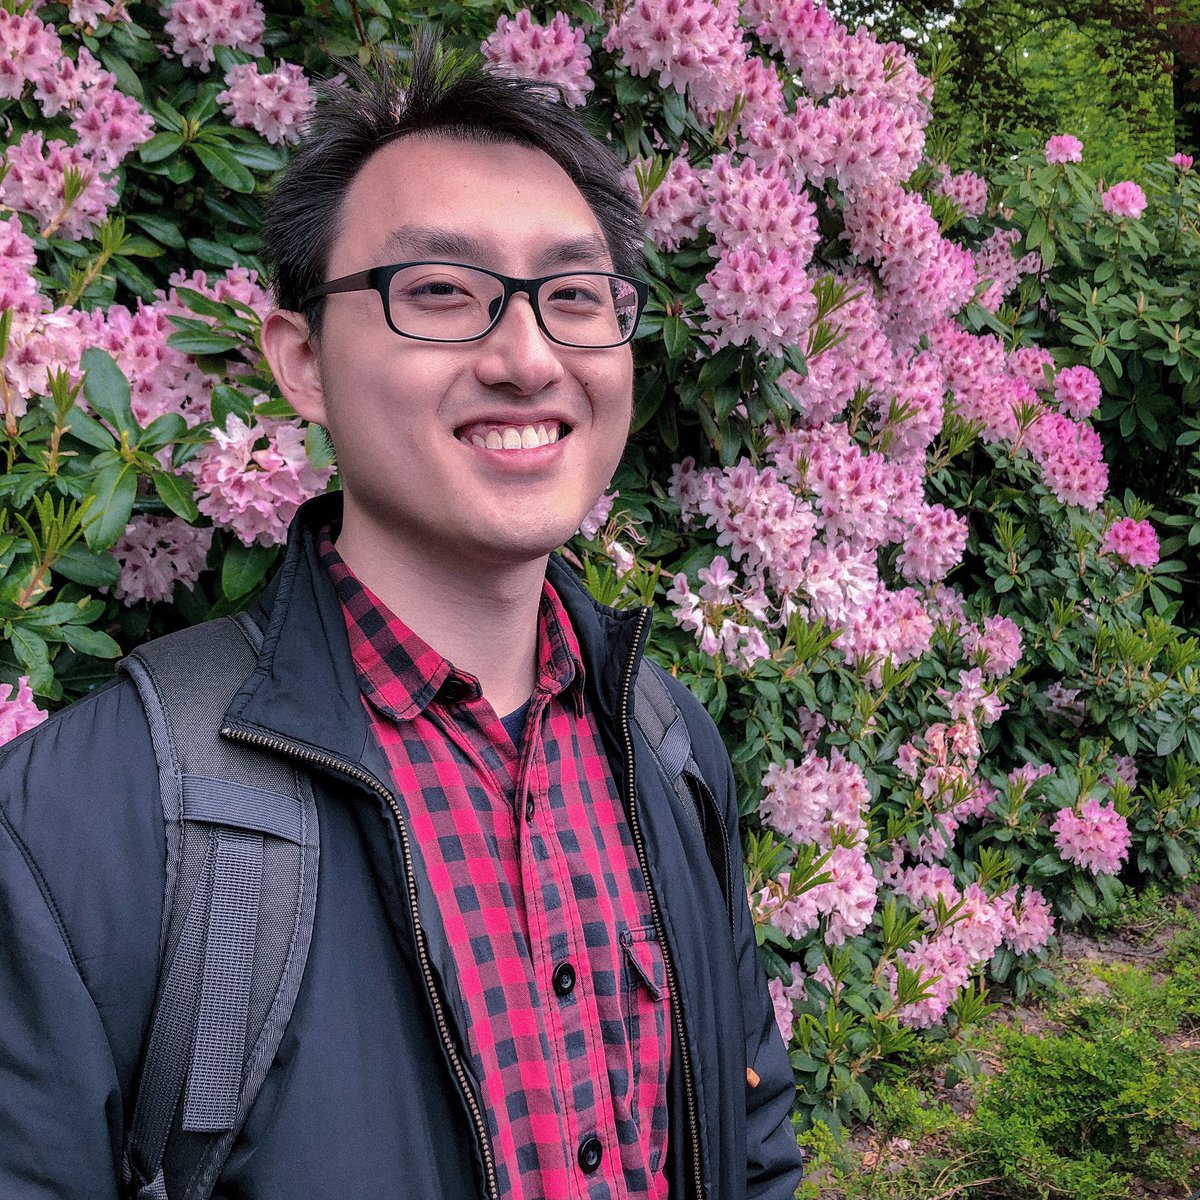 28. Tsen Vei  @LimTsenVei , PhD student in experimental psychology at  @Cambridge_Uni ‘Academics are often critical – towards knowledge & themselves. Therefore, in this new year, I would like to learn to be more forgiving towards myself, and have more faith about the future.’